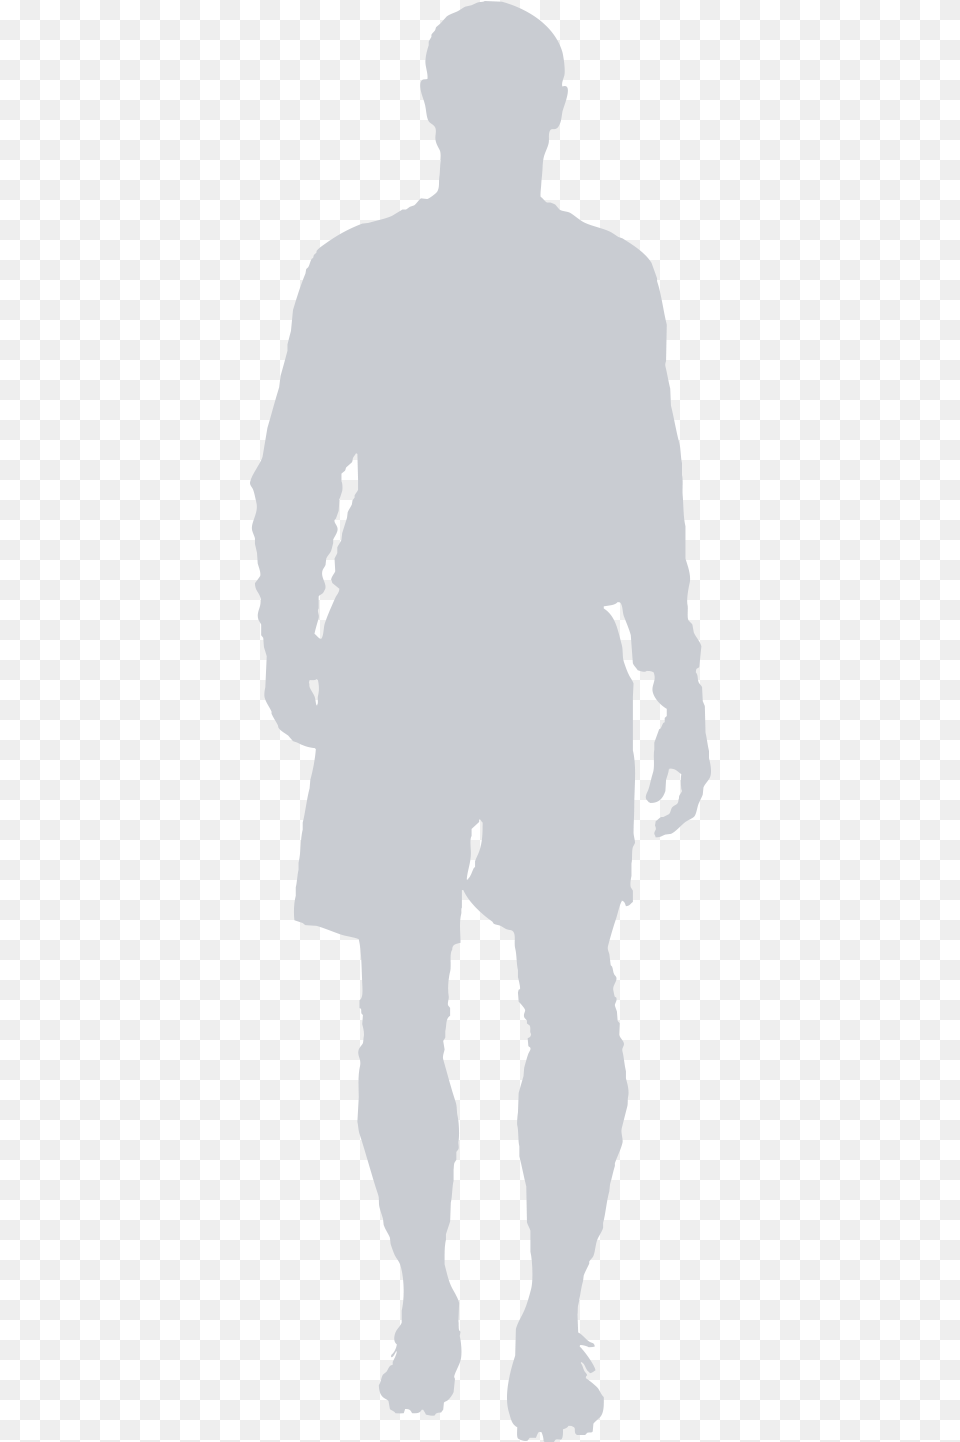 Laura Donhauser Standing, Silhouette, Adult, Male, Man Png Image